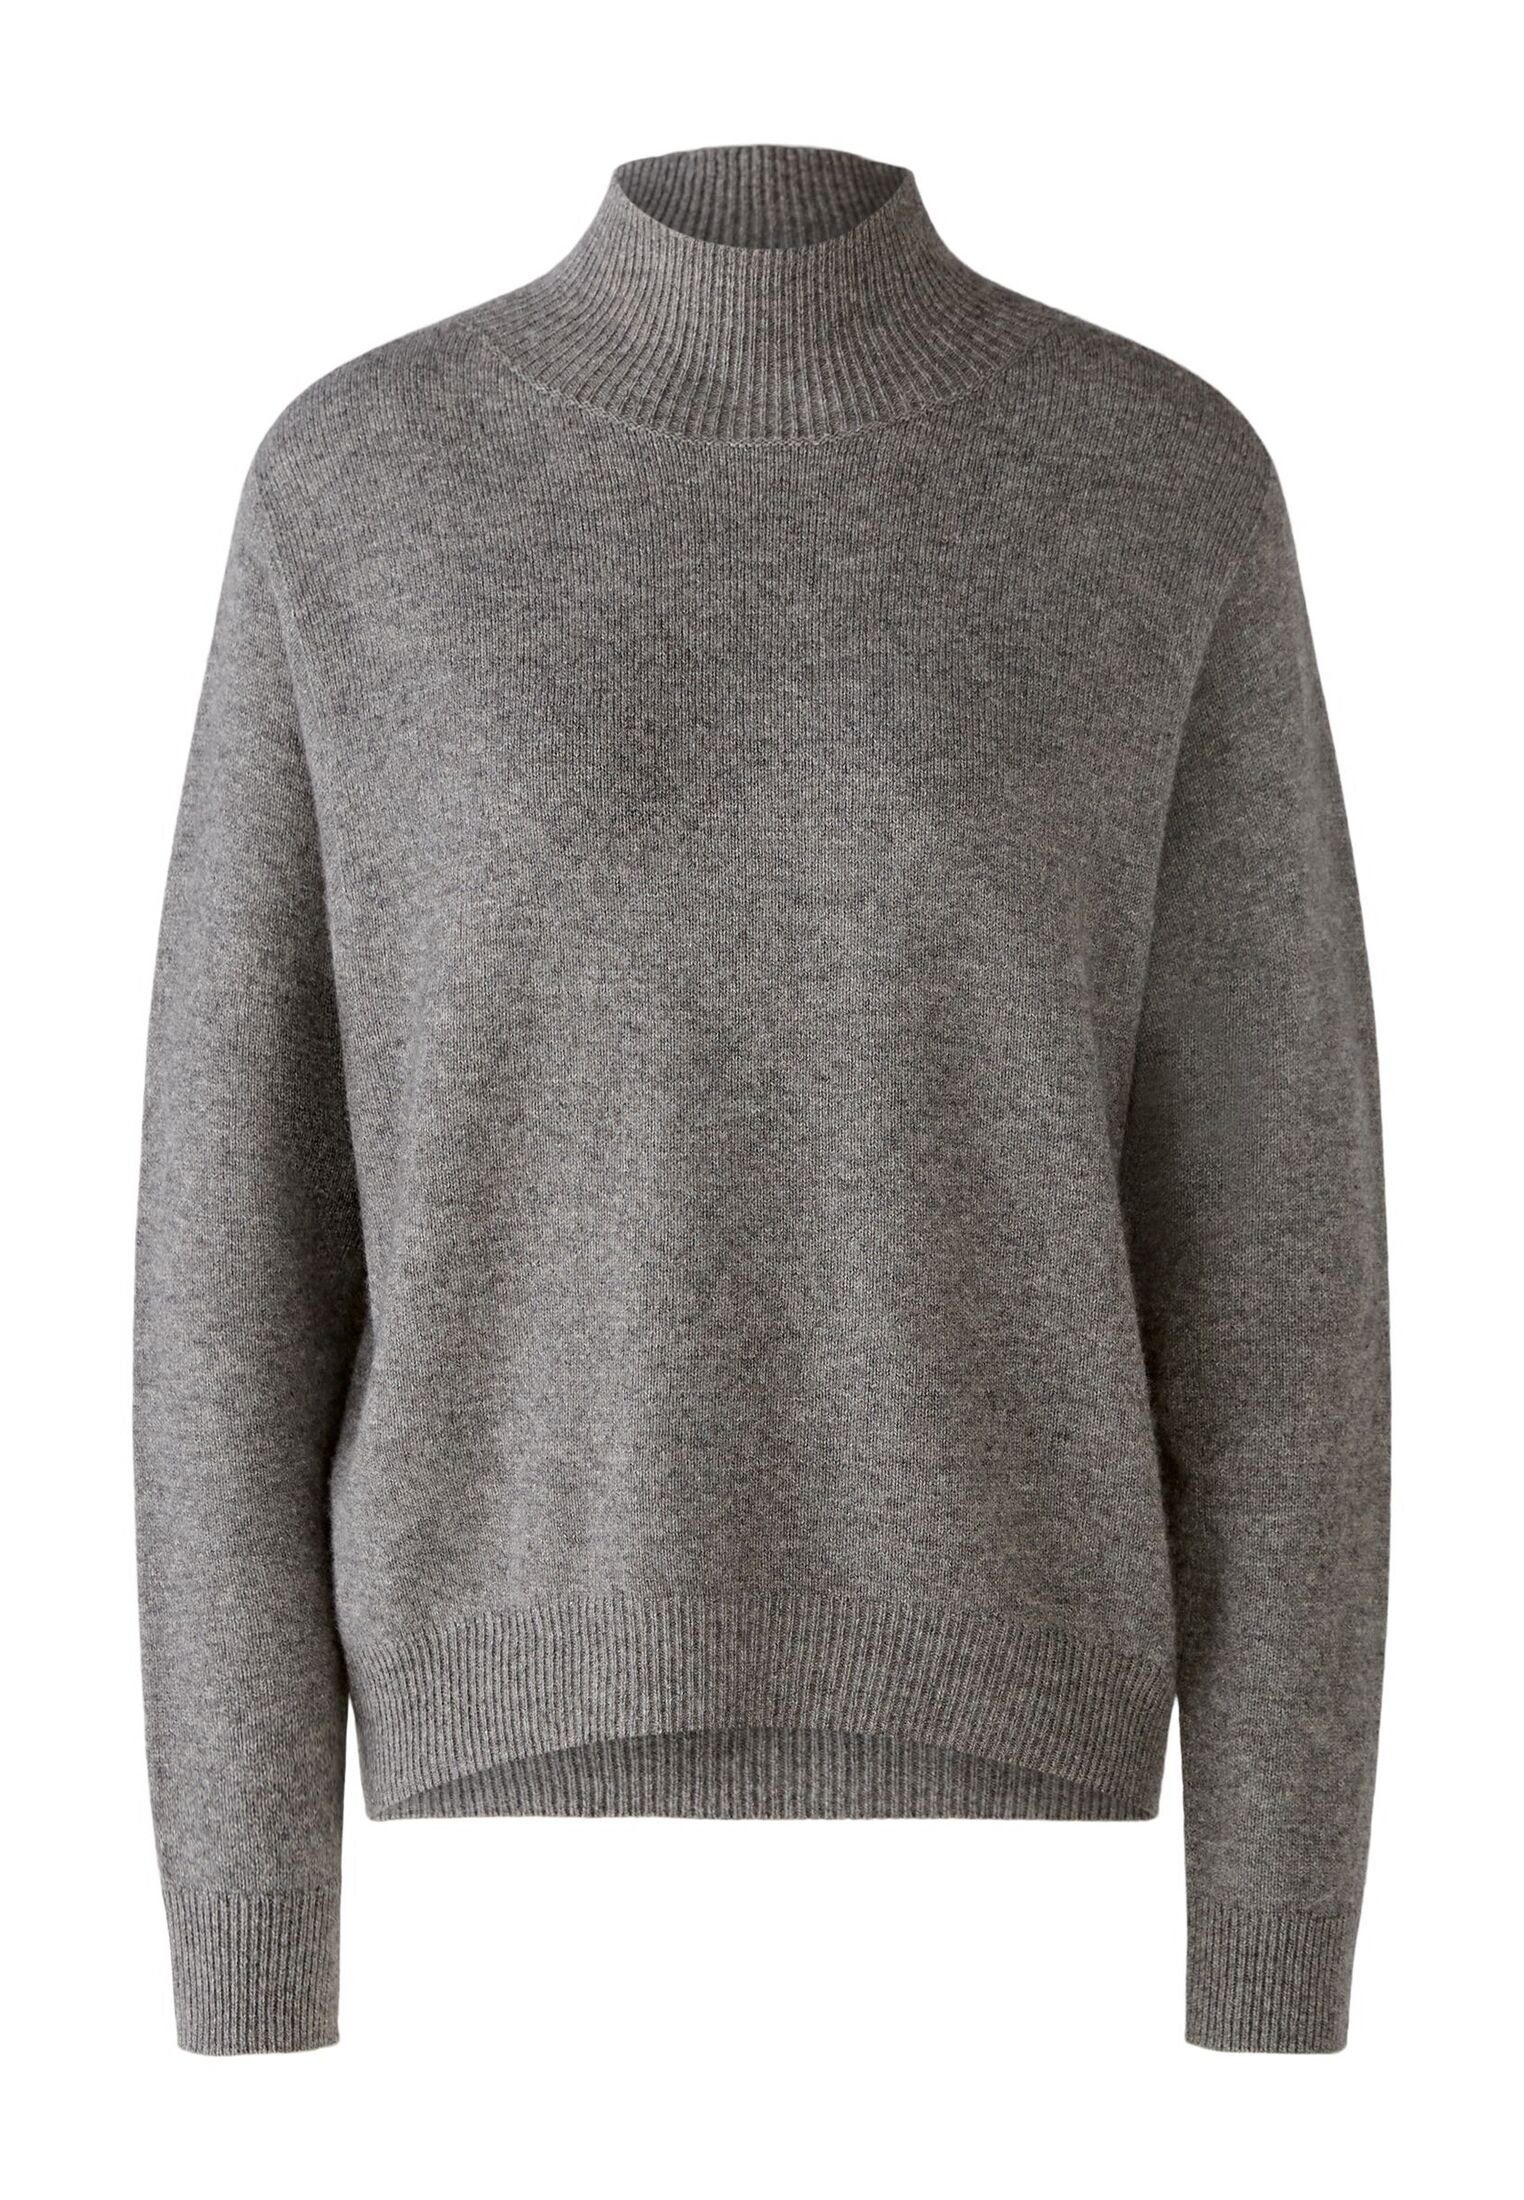 Oui Strickpullover Pullover Wollmischung grey